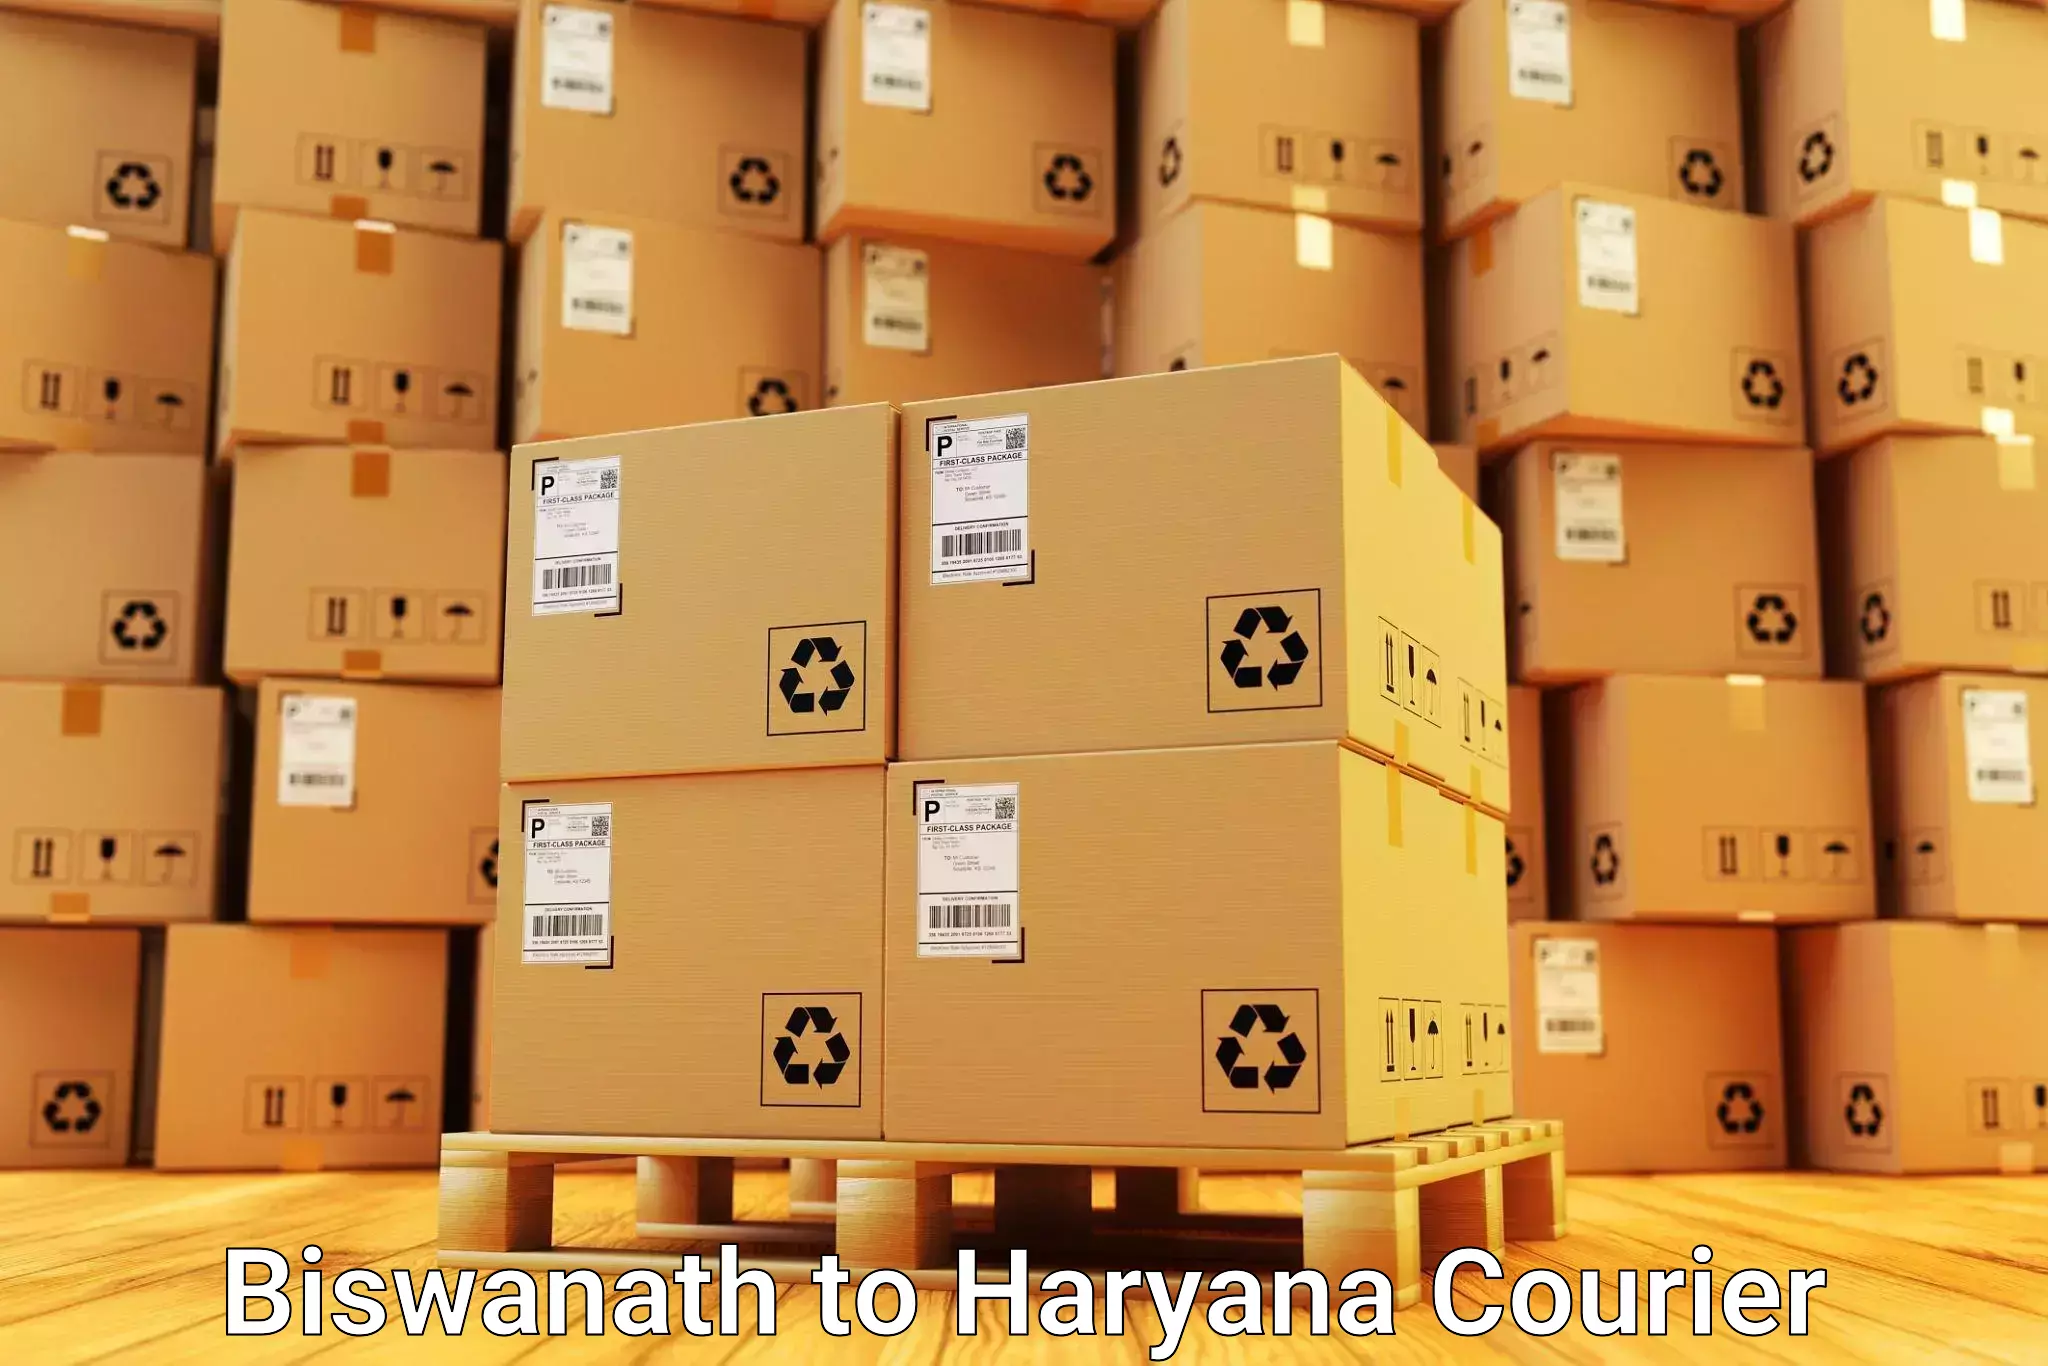 Furniture relocation experts Biswanath to Pinjore